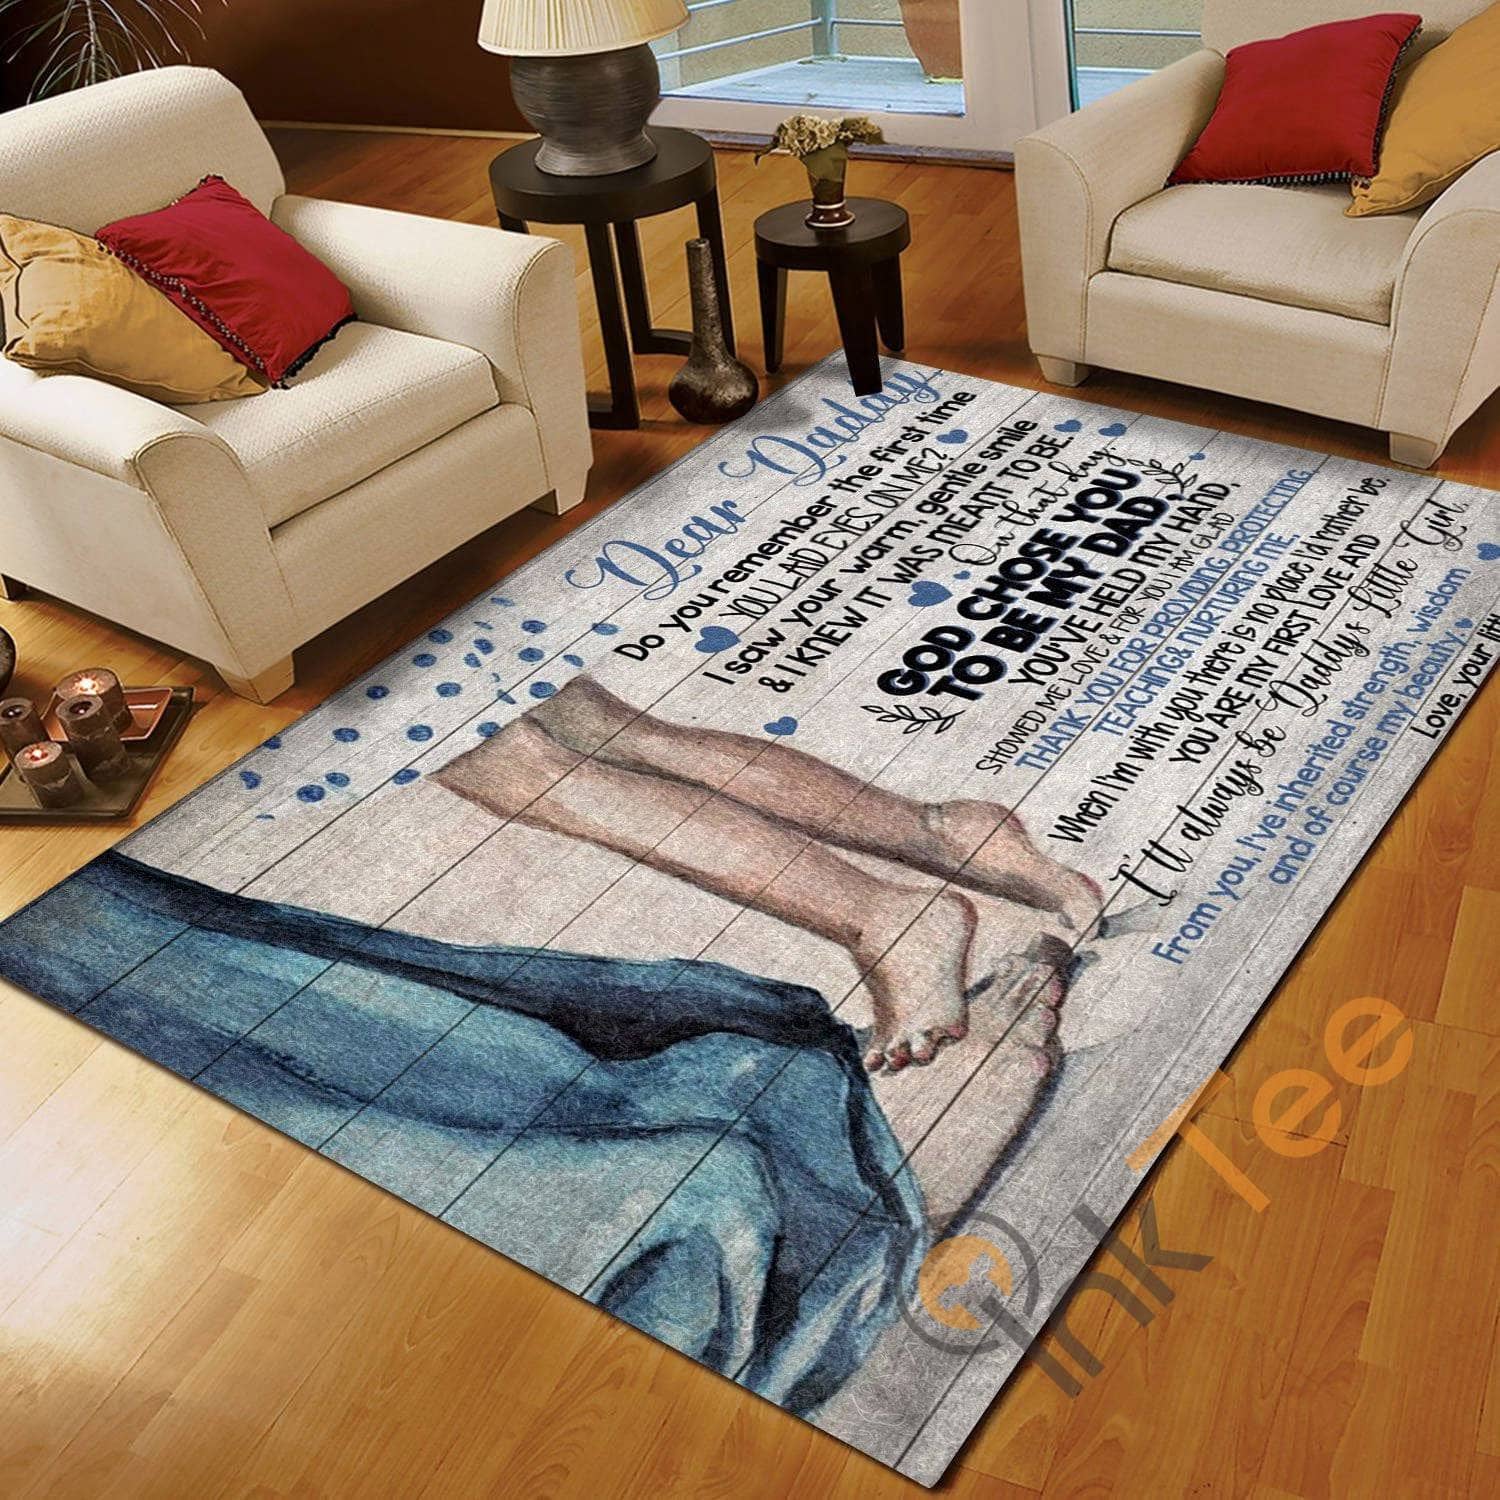 Daughter To Dad Dear Daddy Thank You For Being My Bedroom Home Decoration Gift Father's Day Rug